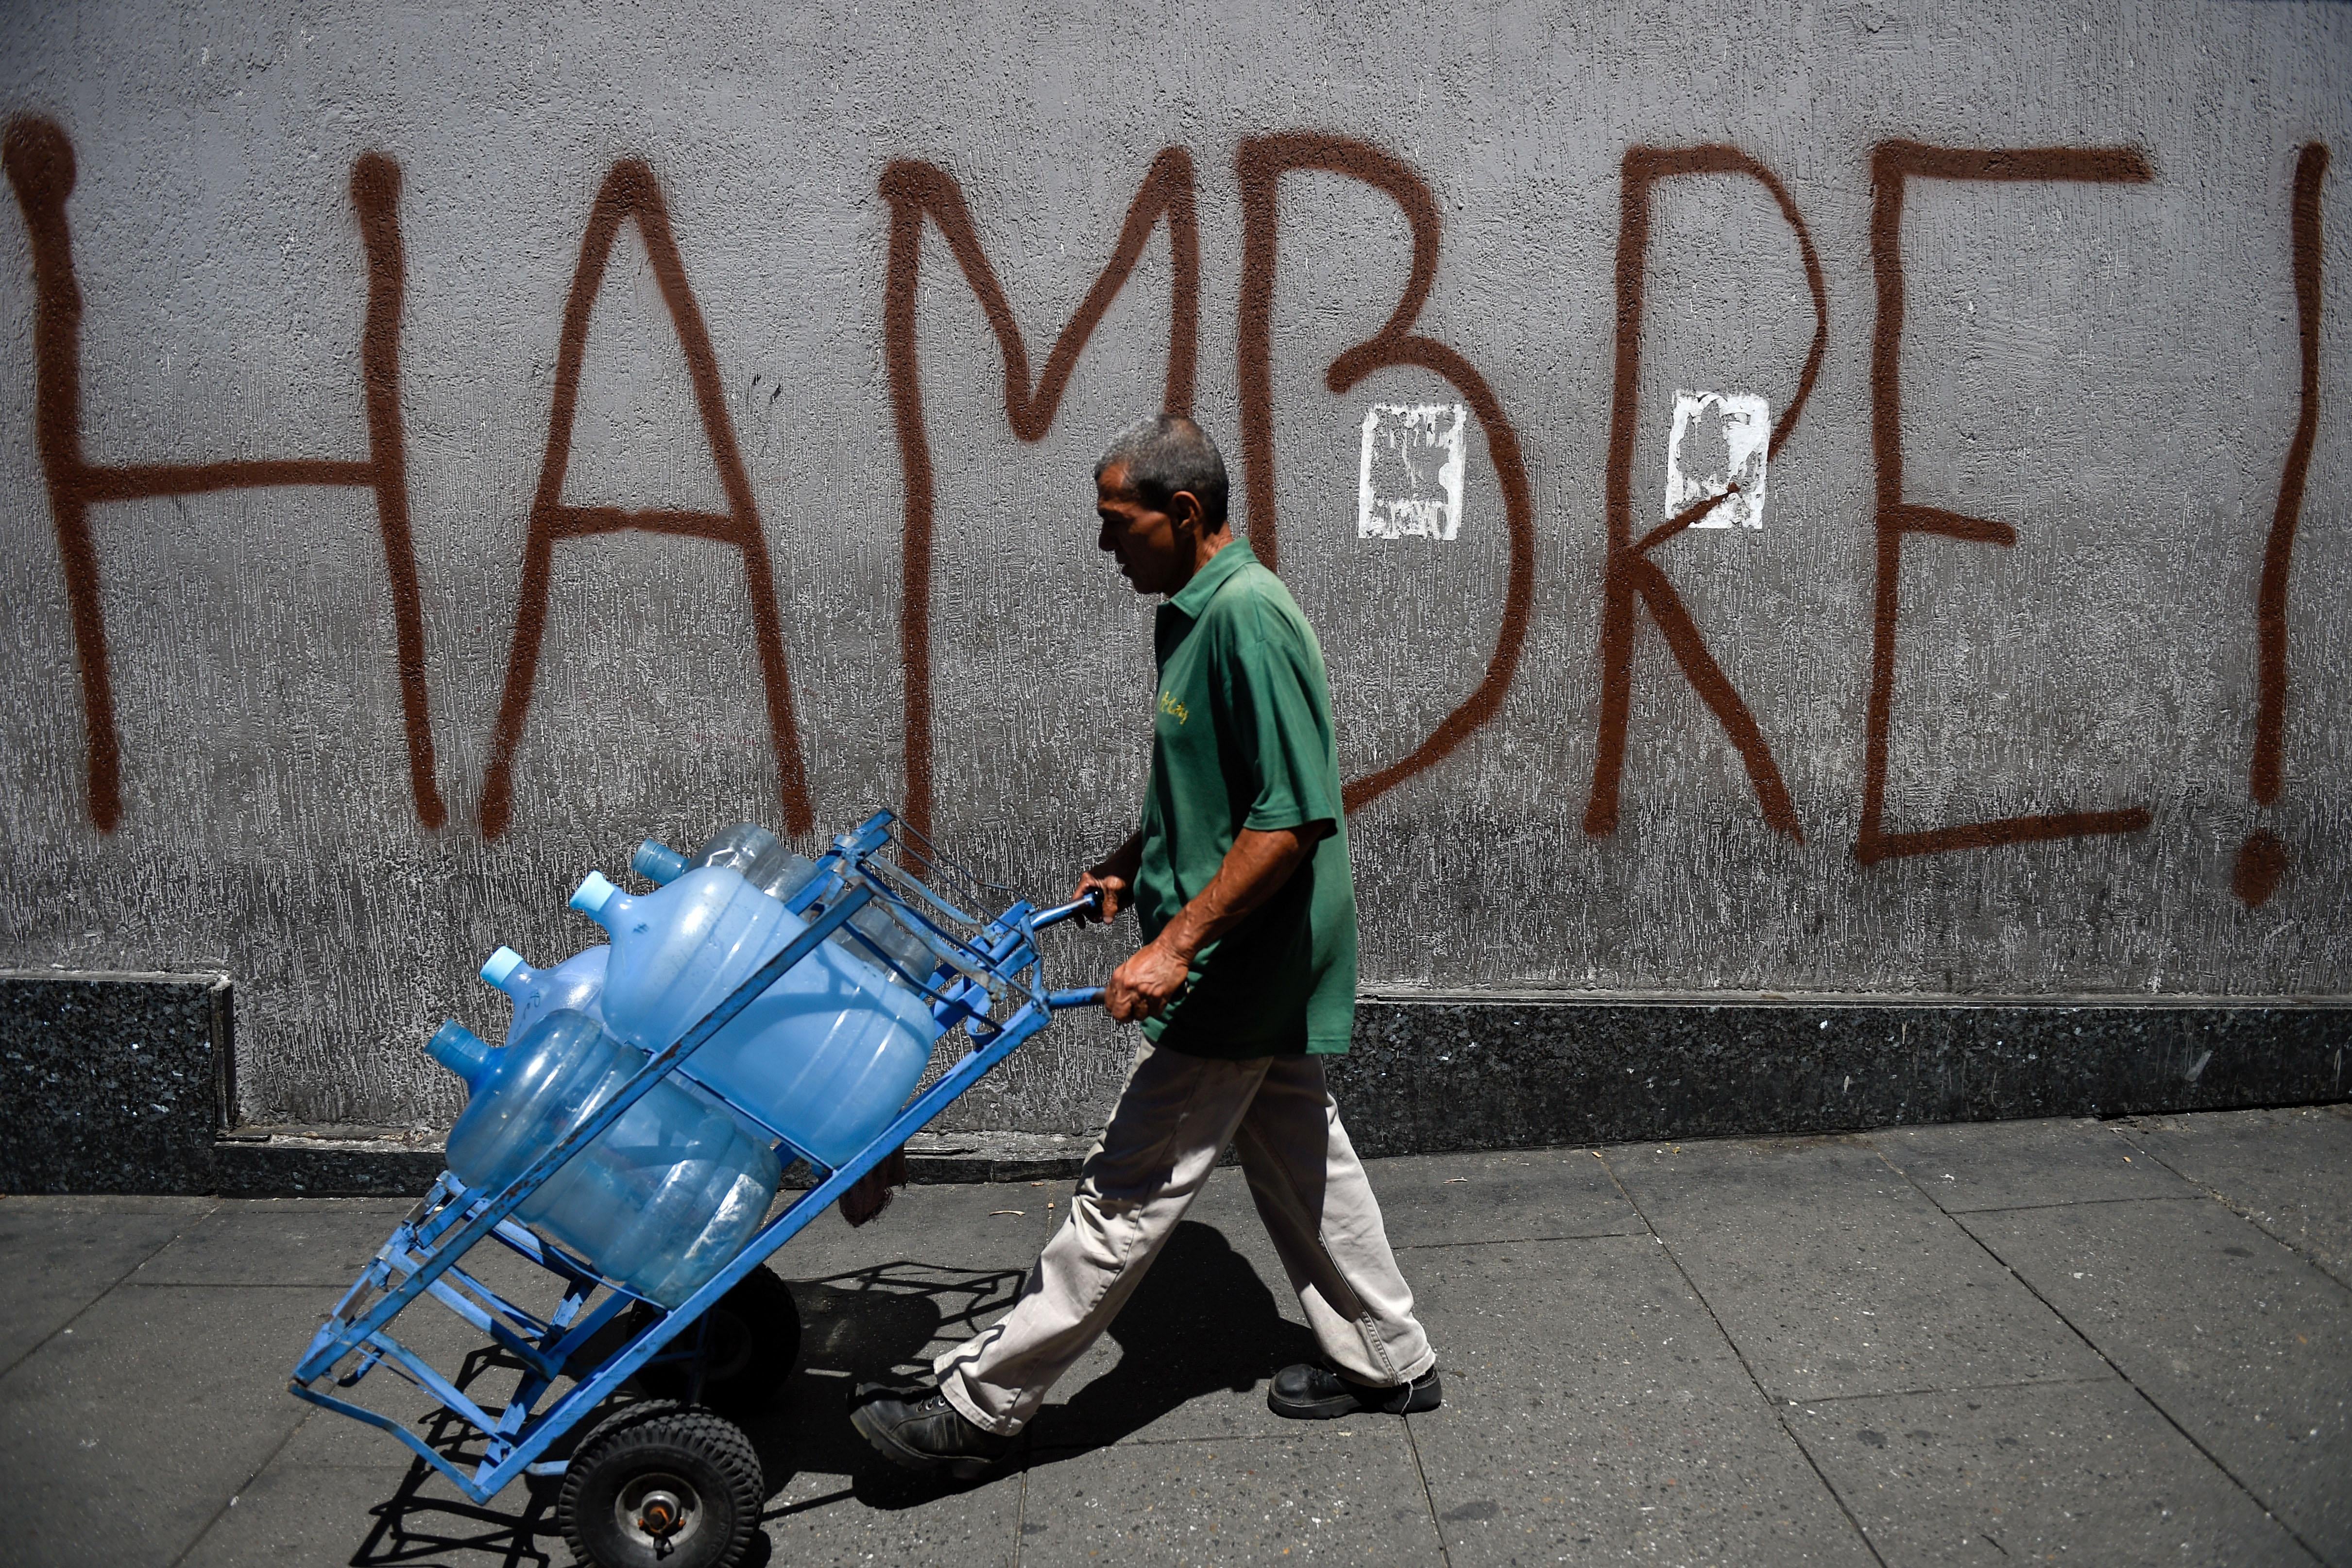 A Venezuelan man pushes a hand truck loaded with water jugs in front of street graffiti reading "HAMBRE!" or "hungry" in Spanish.